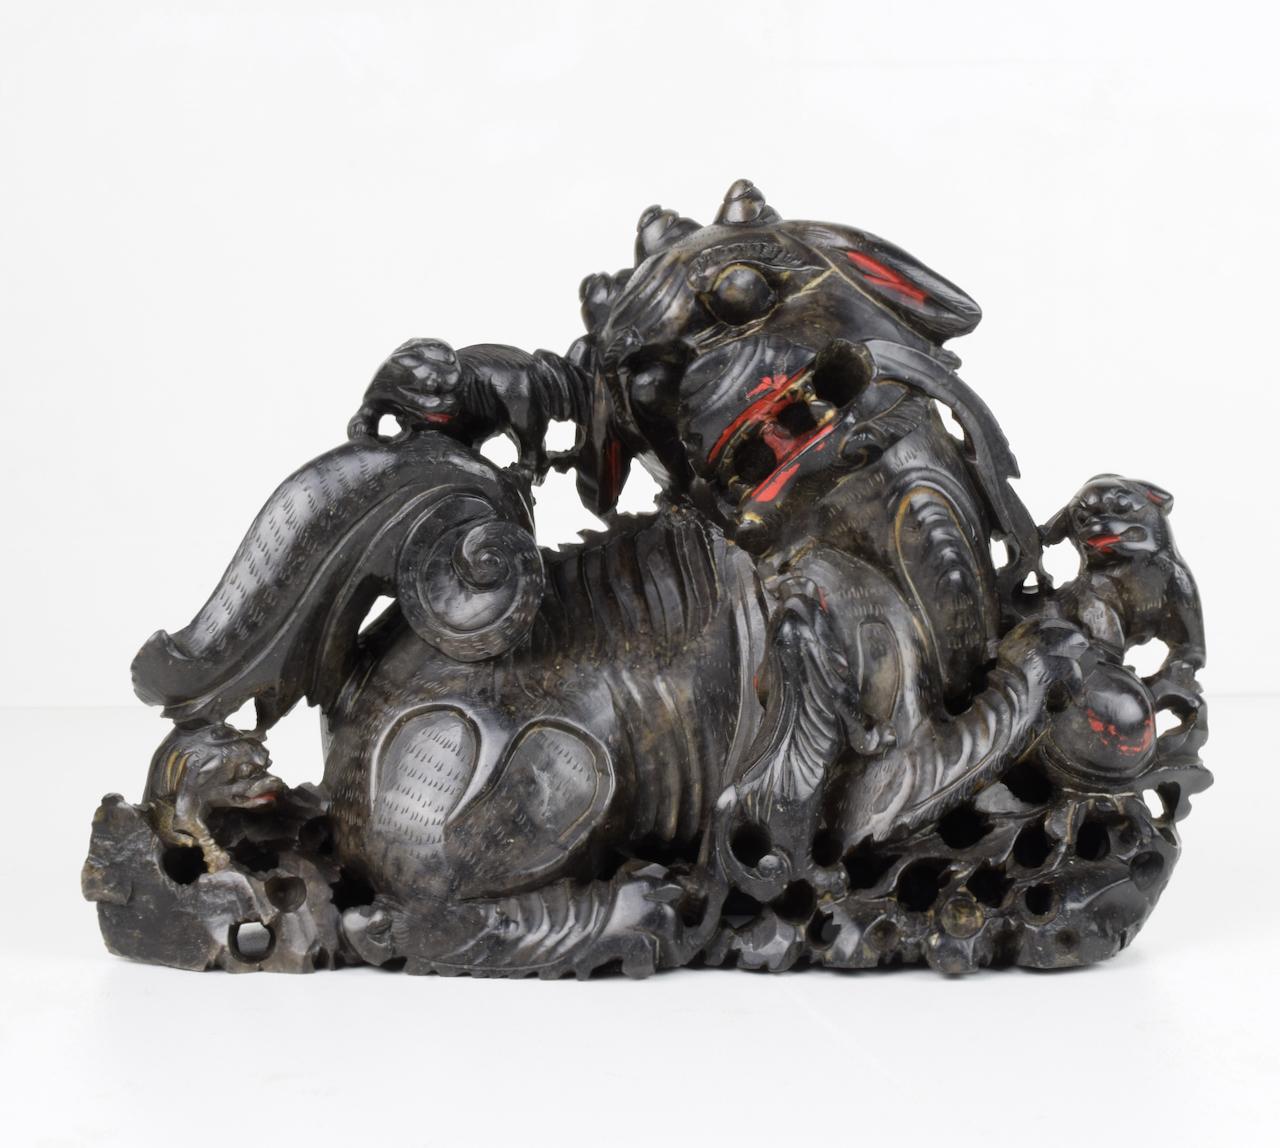 China, sec. XX
In black soapstone.
Traces of red painting.
Size: cm 24 x 7 x 18.